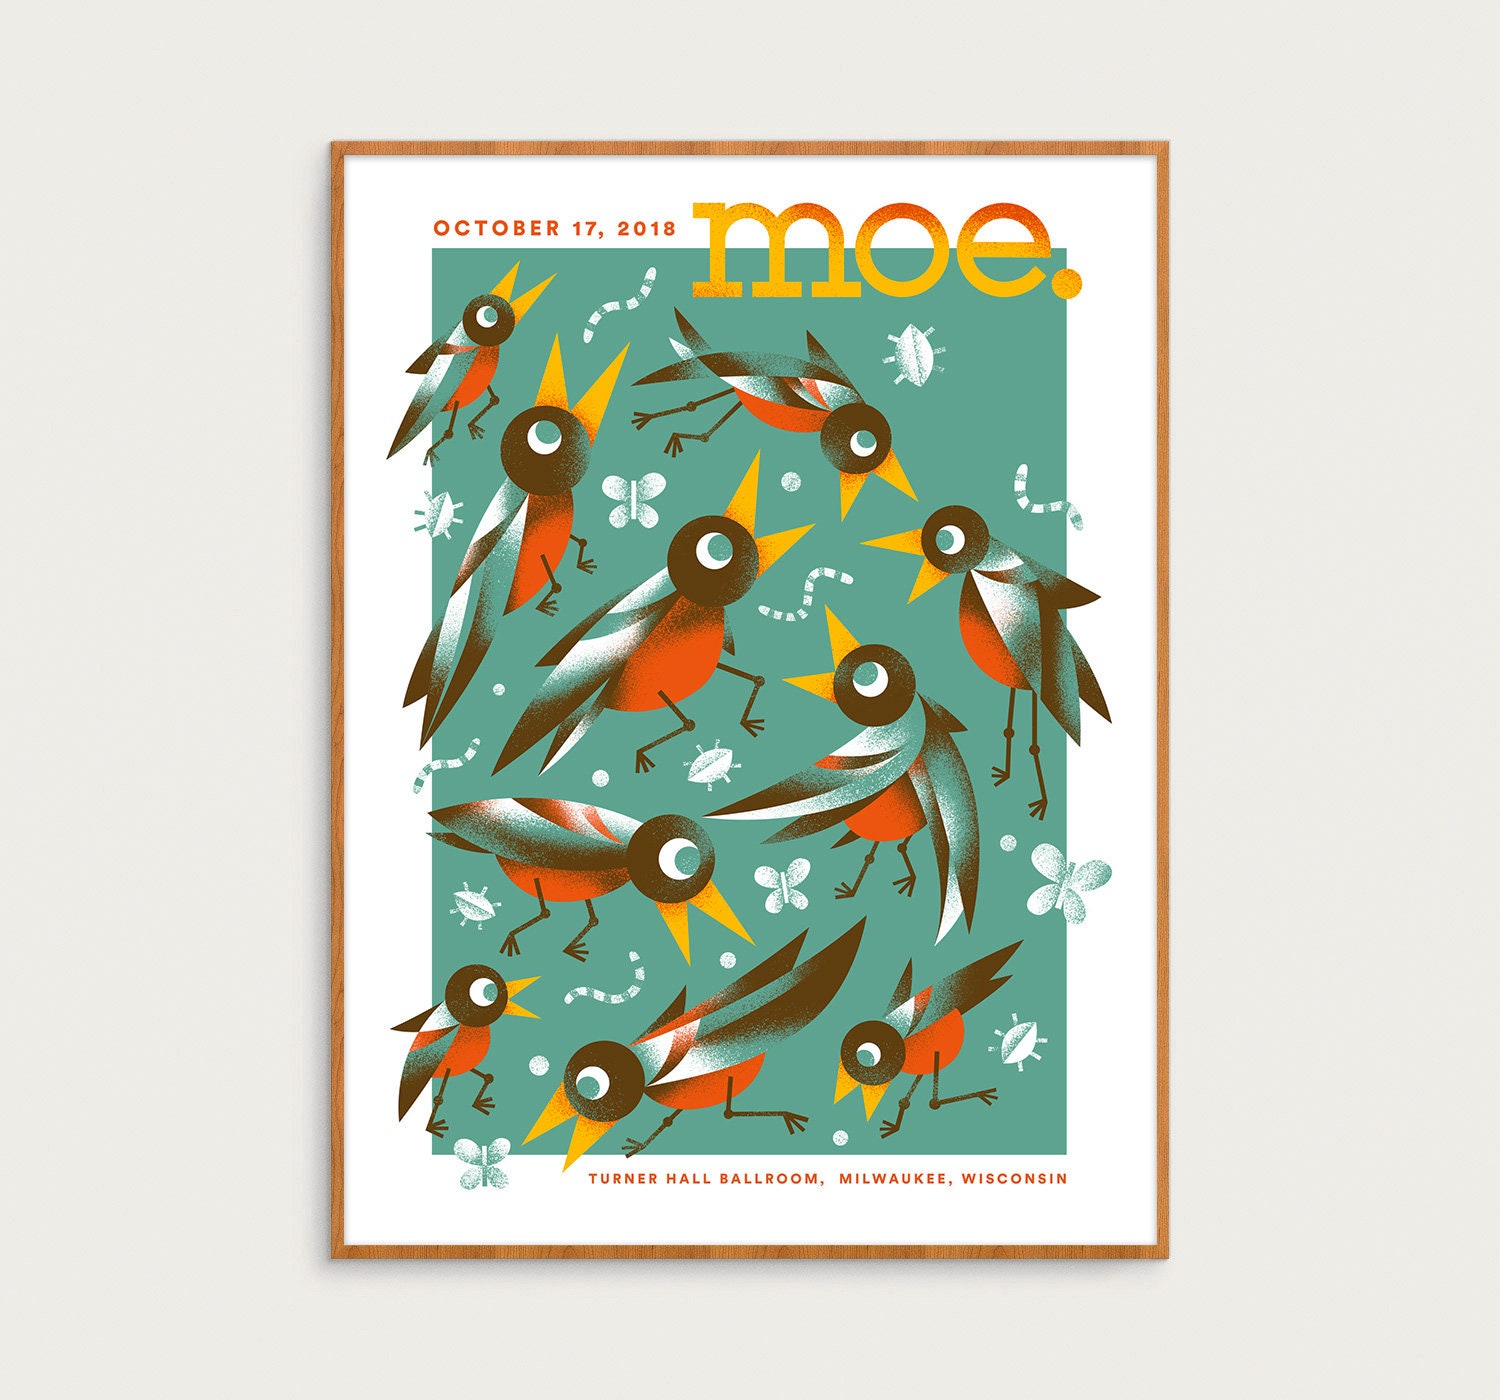 Moe's Love Tester Poster for Sale by McPod